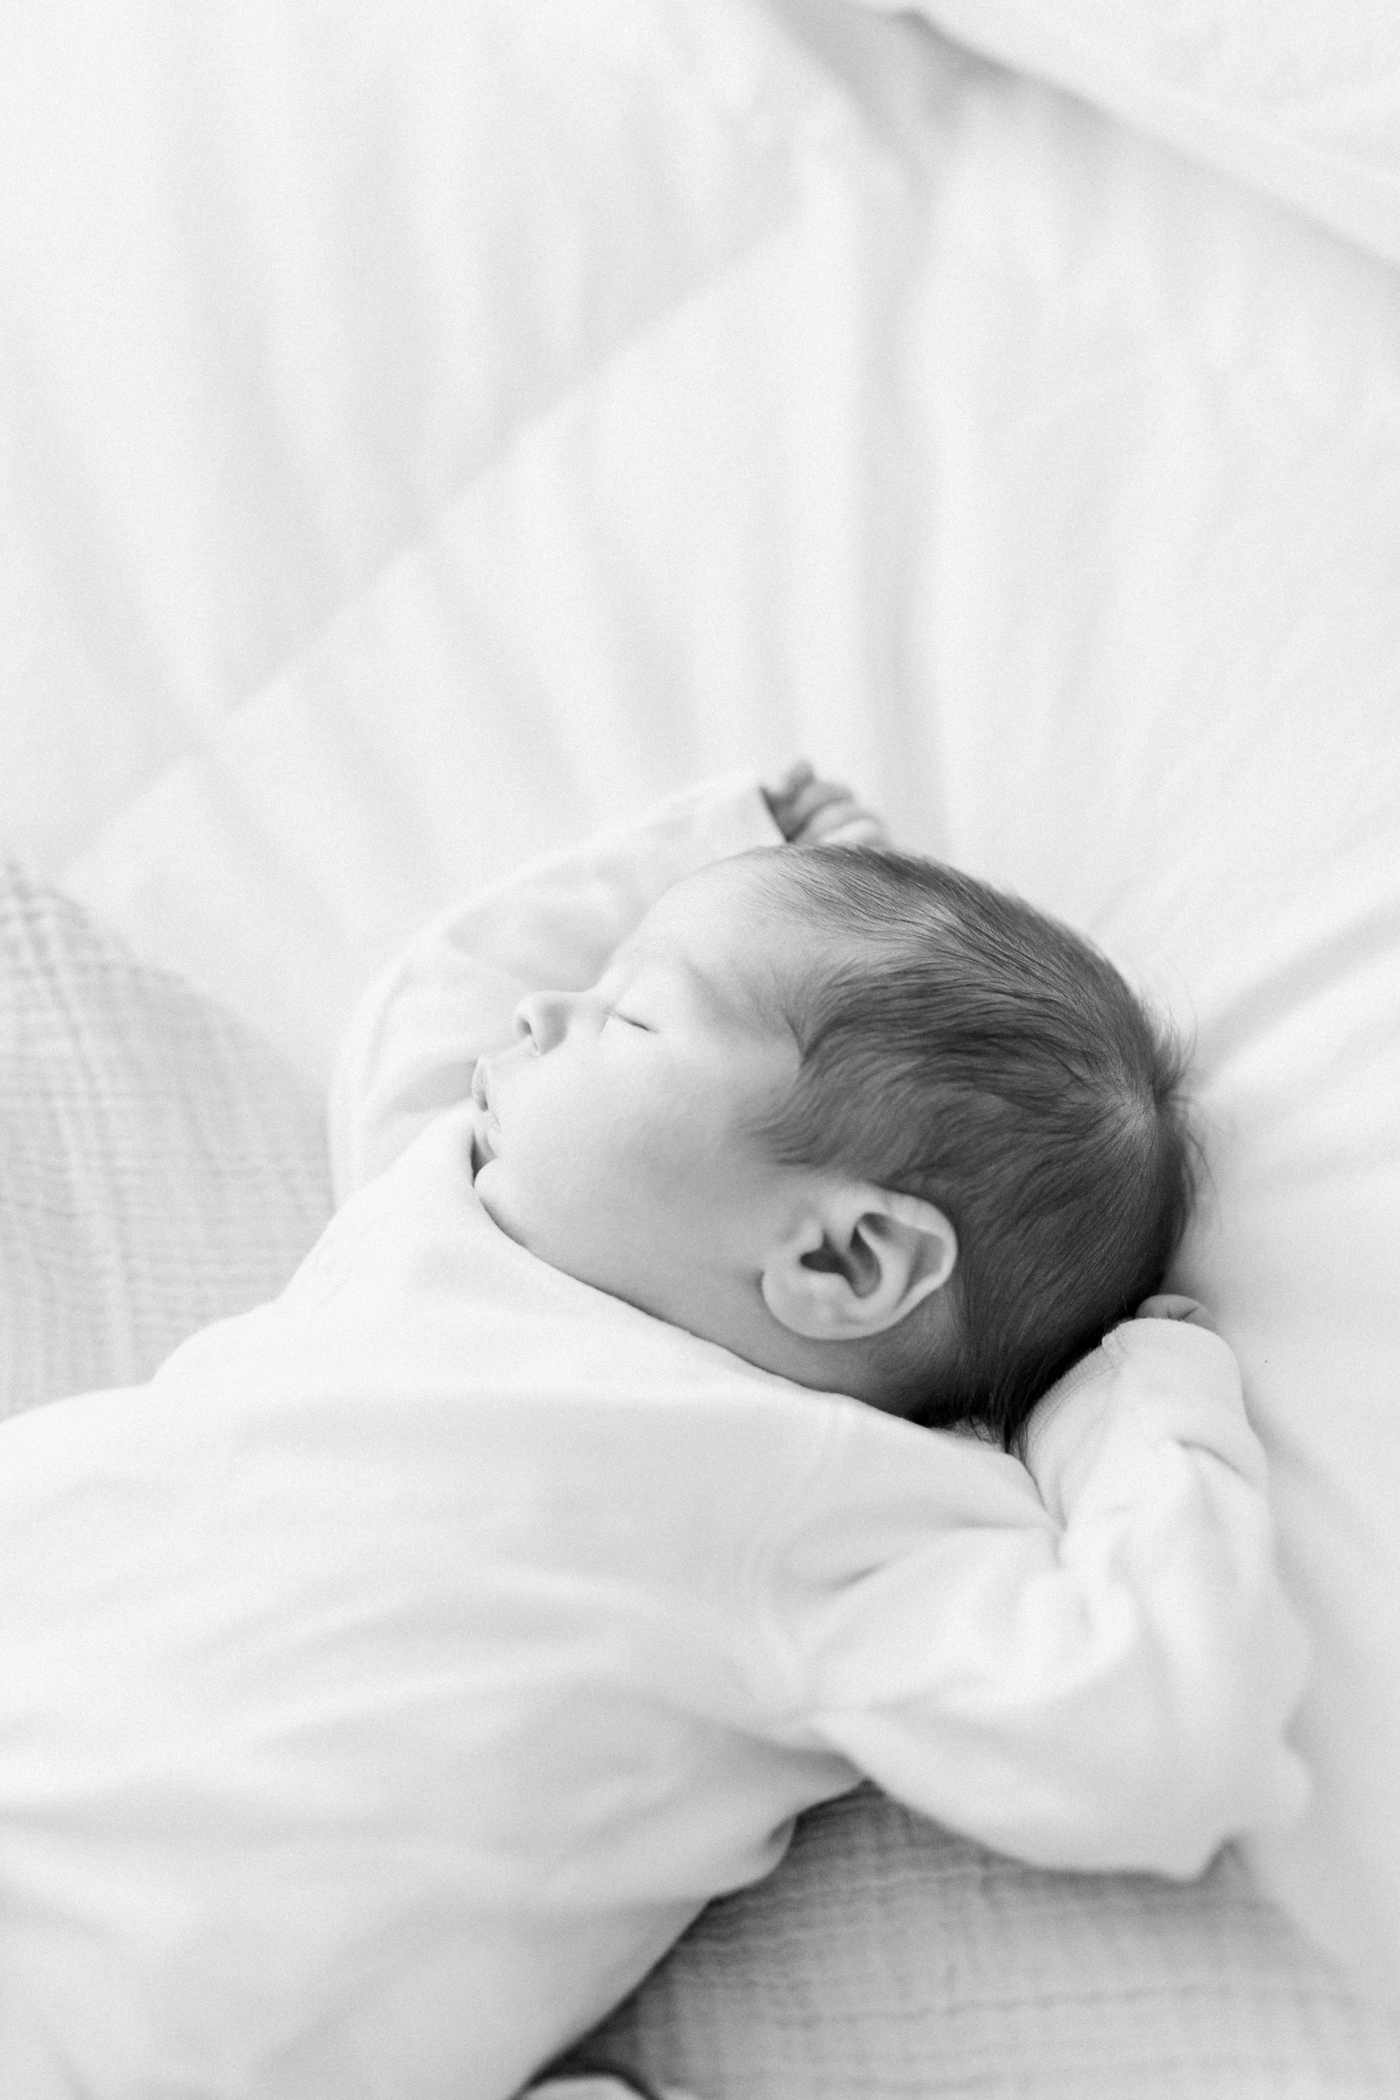 Black and white film photo of a sleeping newborn | Photo by Caitlyn Motycka Photography.